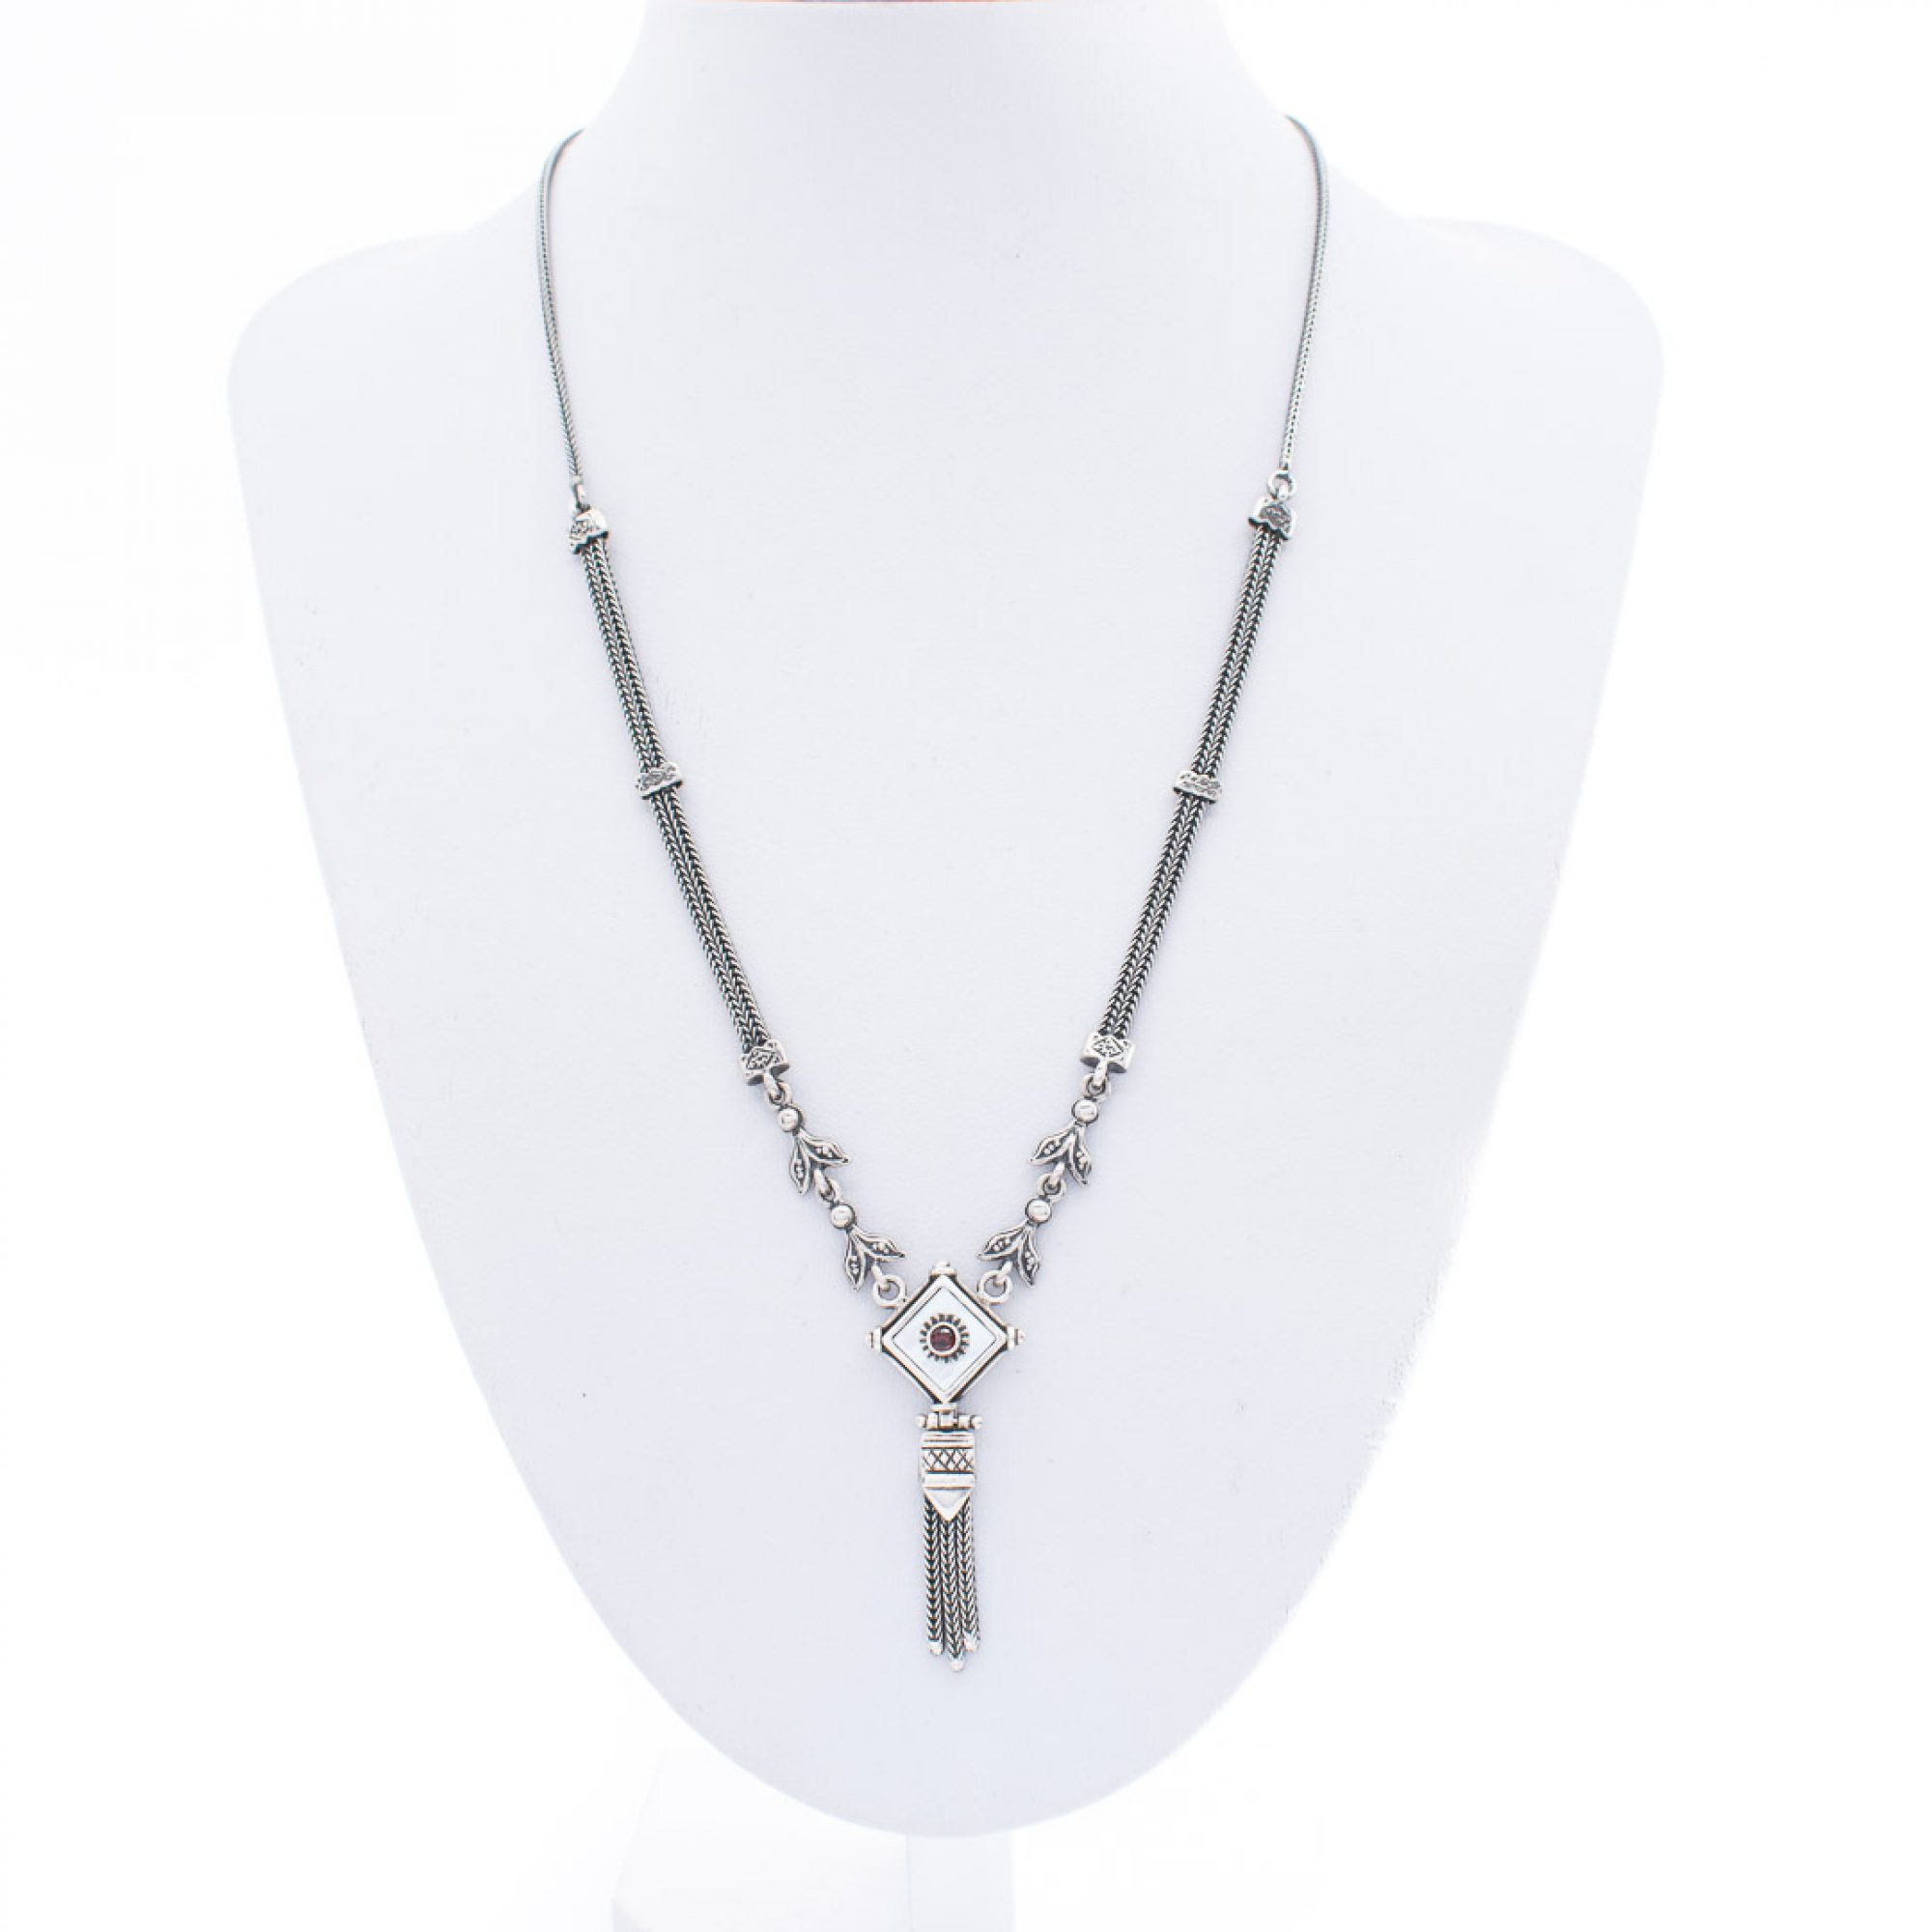 Oxidised necklace with mother of pearl and garnet